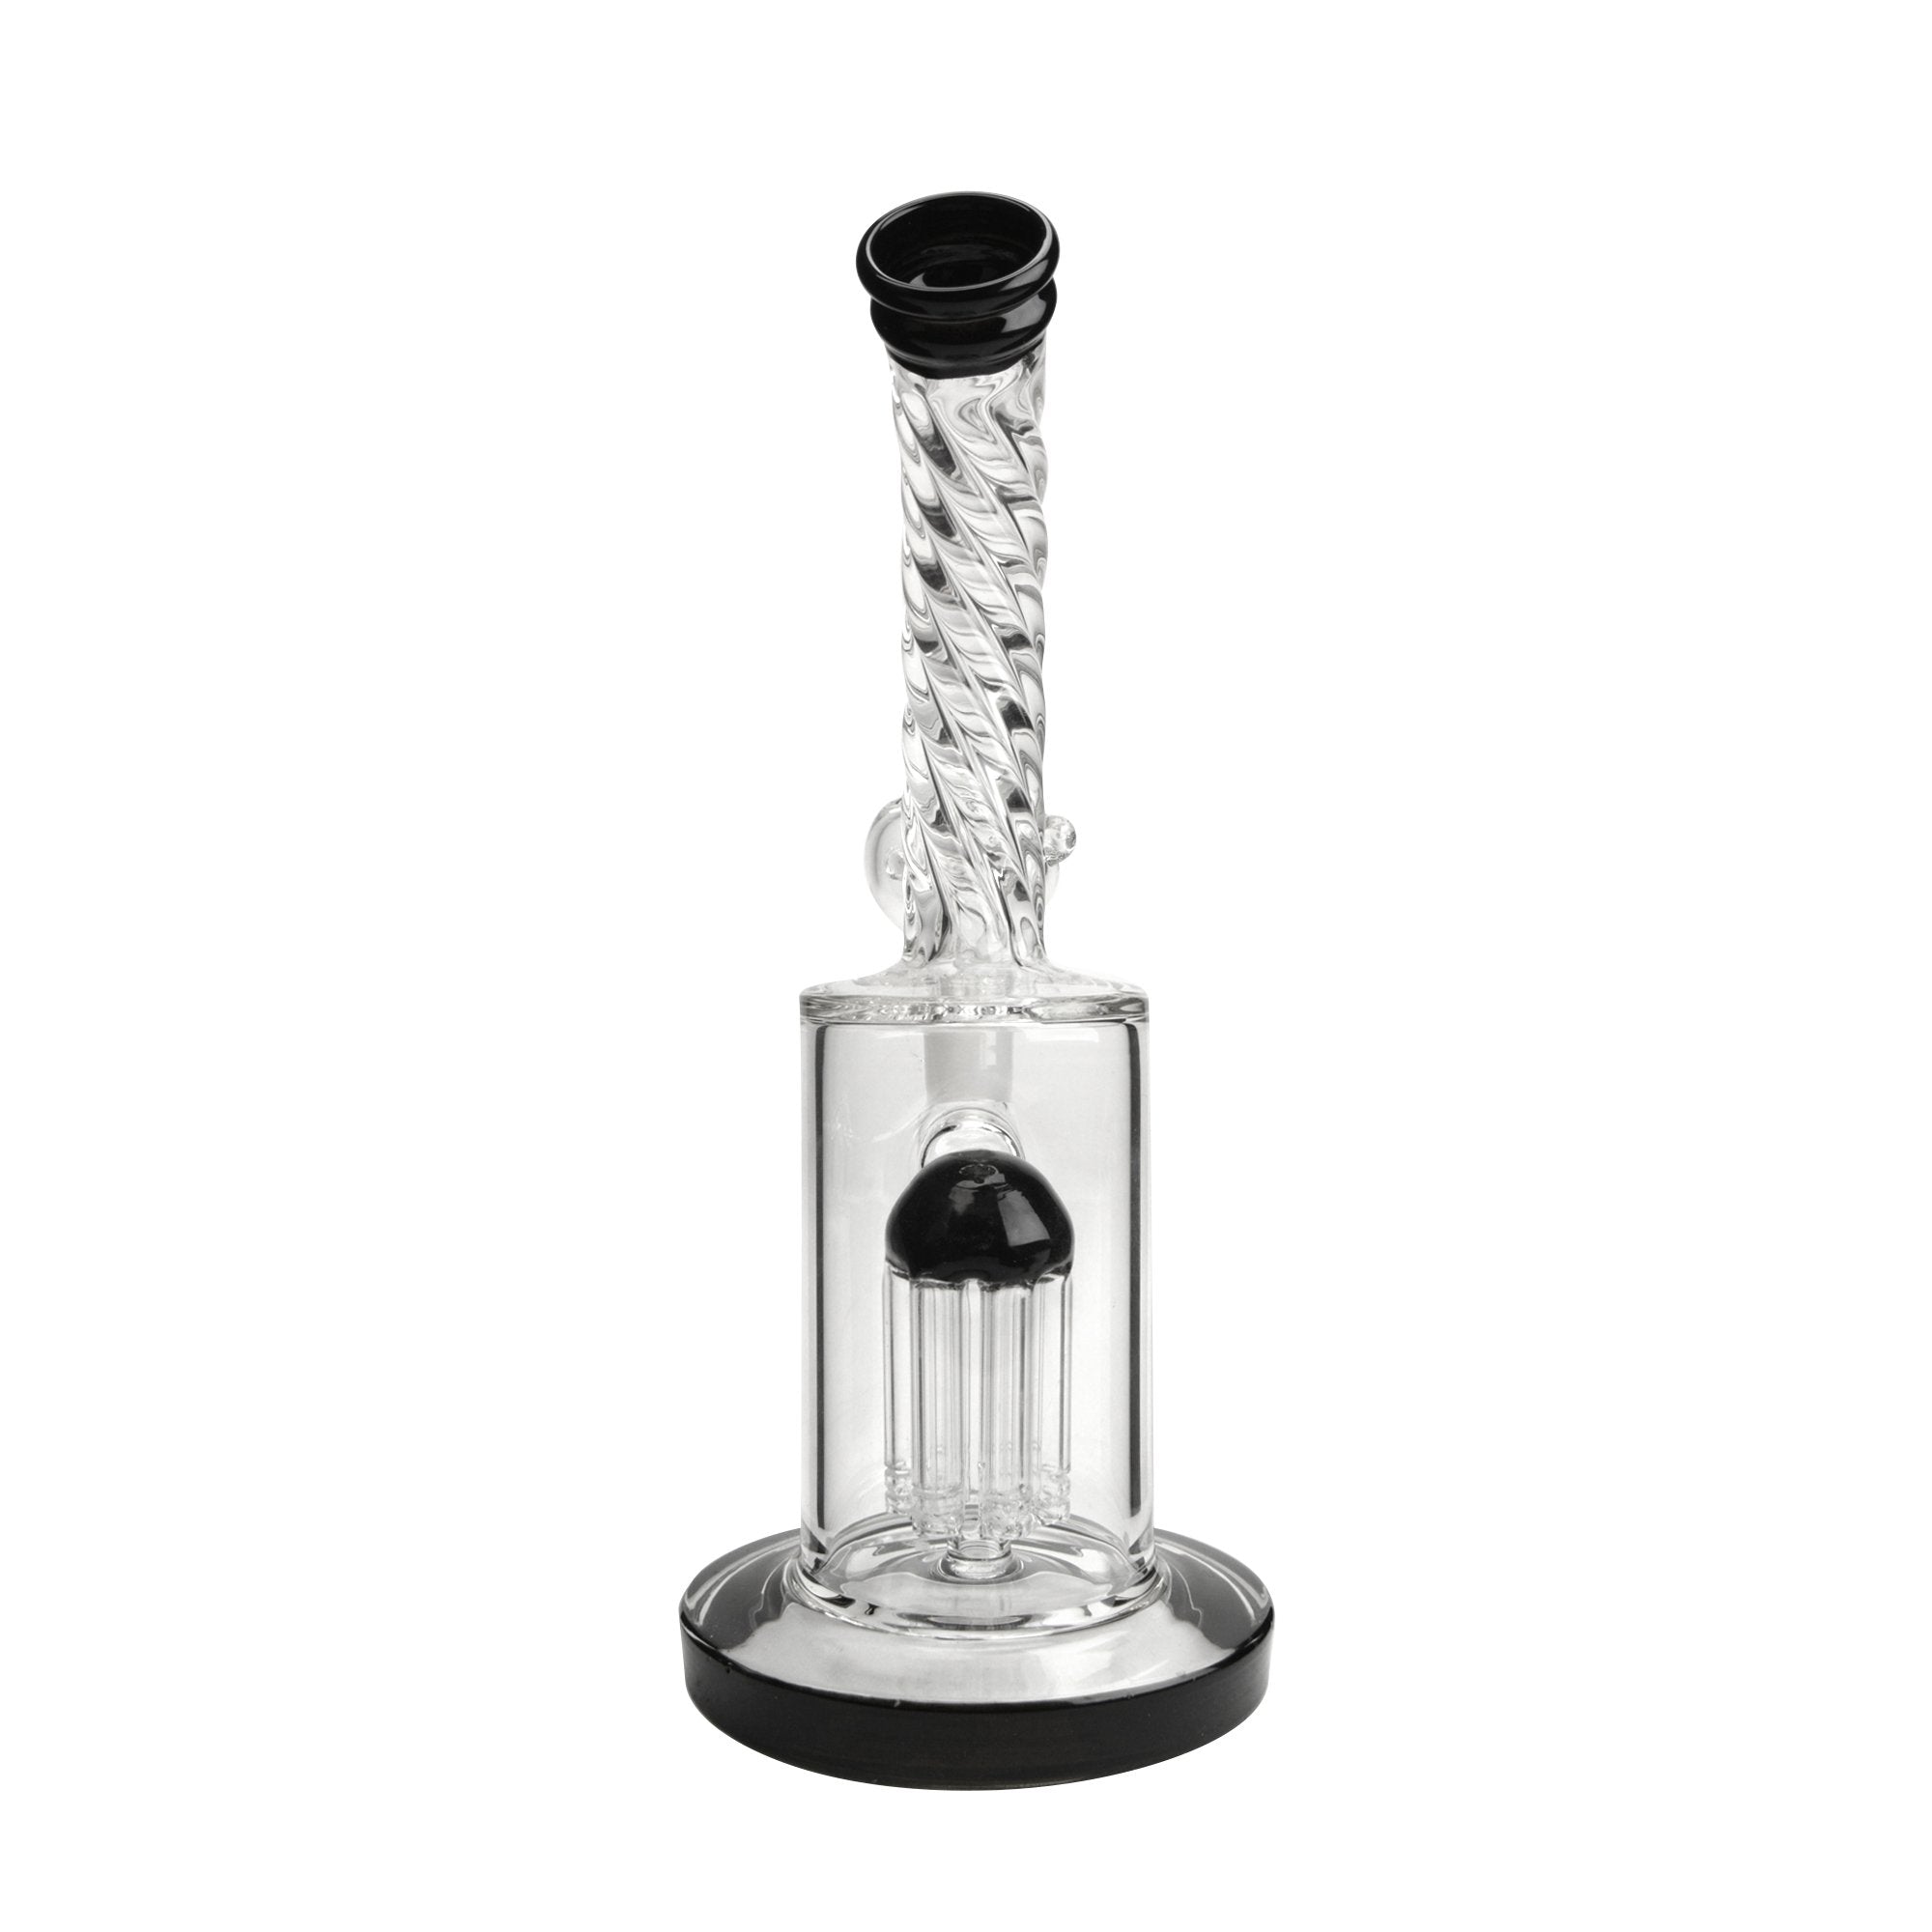 Spiral Neck Tree Perc Glass Water Pipe w/ Thick Base | 8in Tall - 14mm Bowl - Black - 4